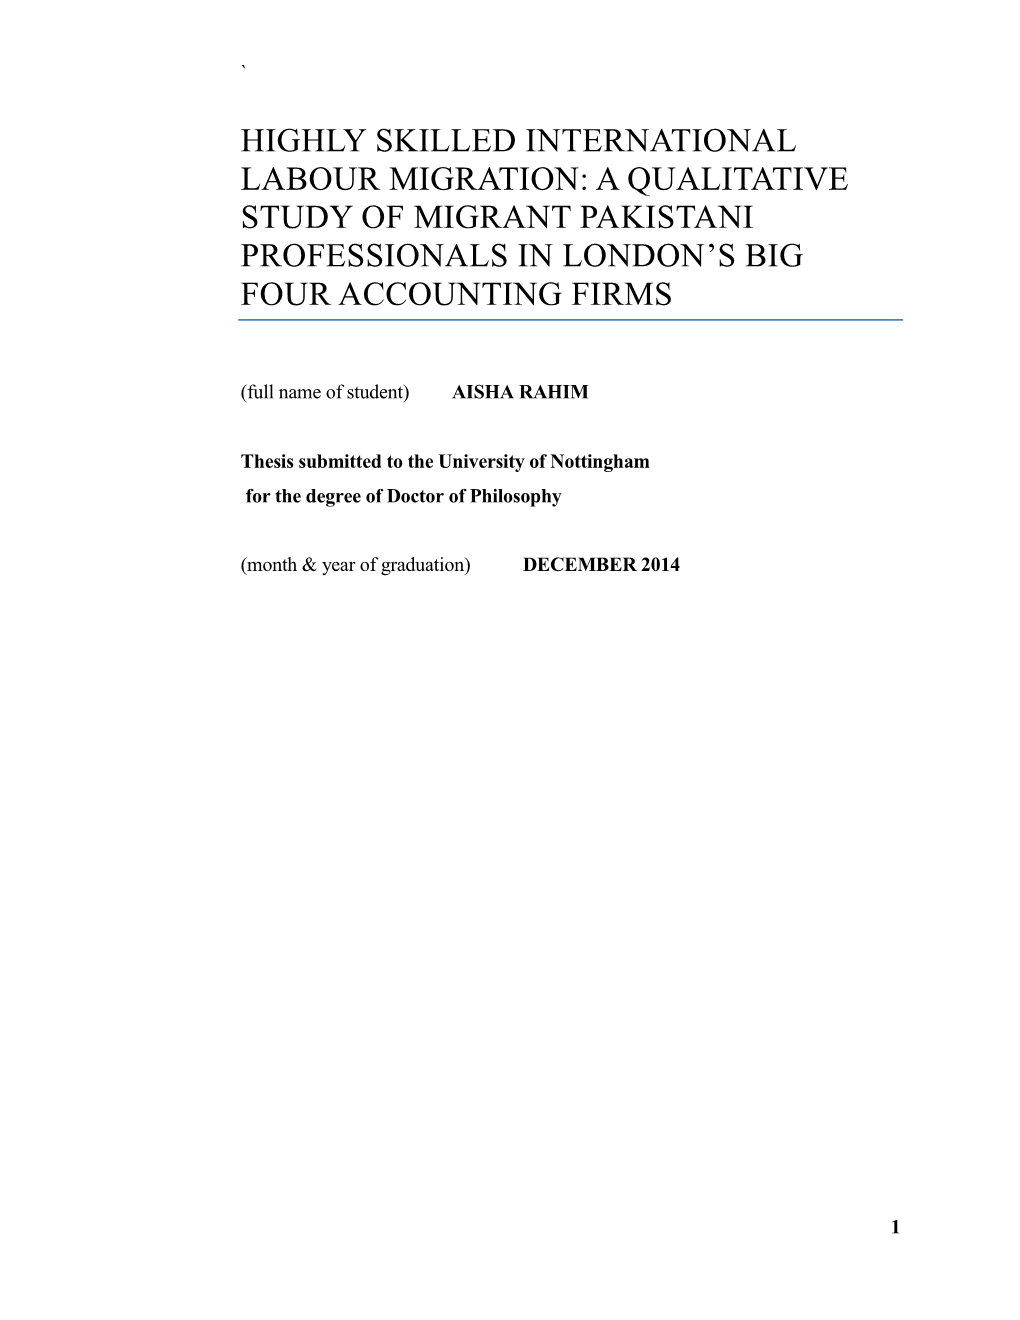 Highly Skilled International Labour Migration: a Qualitative Study of Migrant Pakistani Professionals in London’S Big Four Accounting Firms